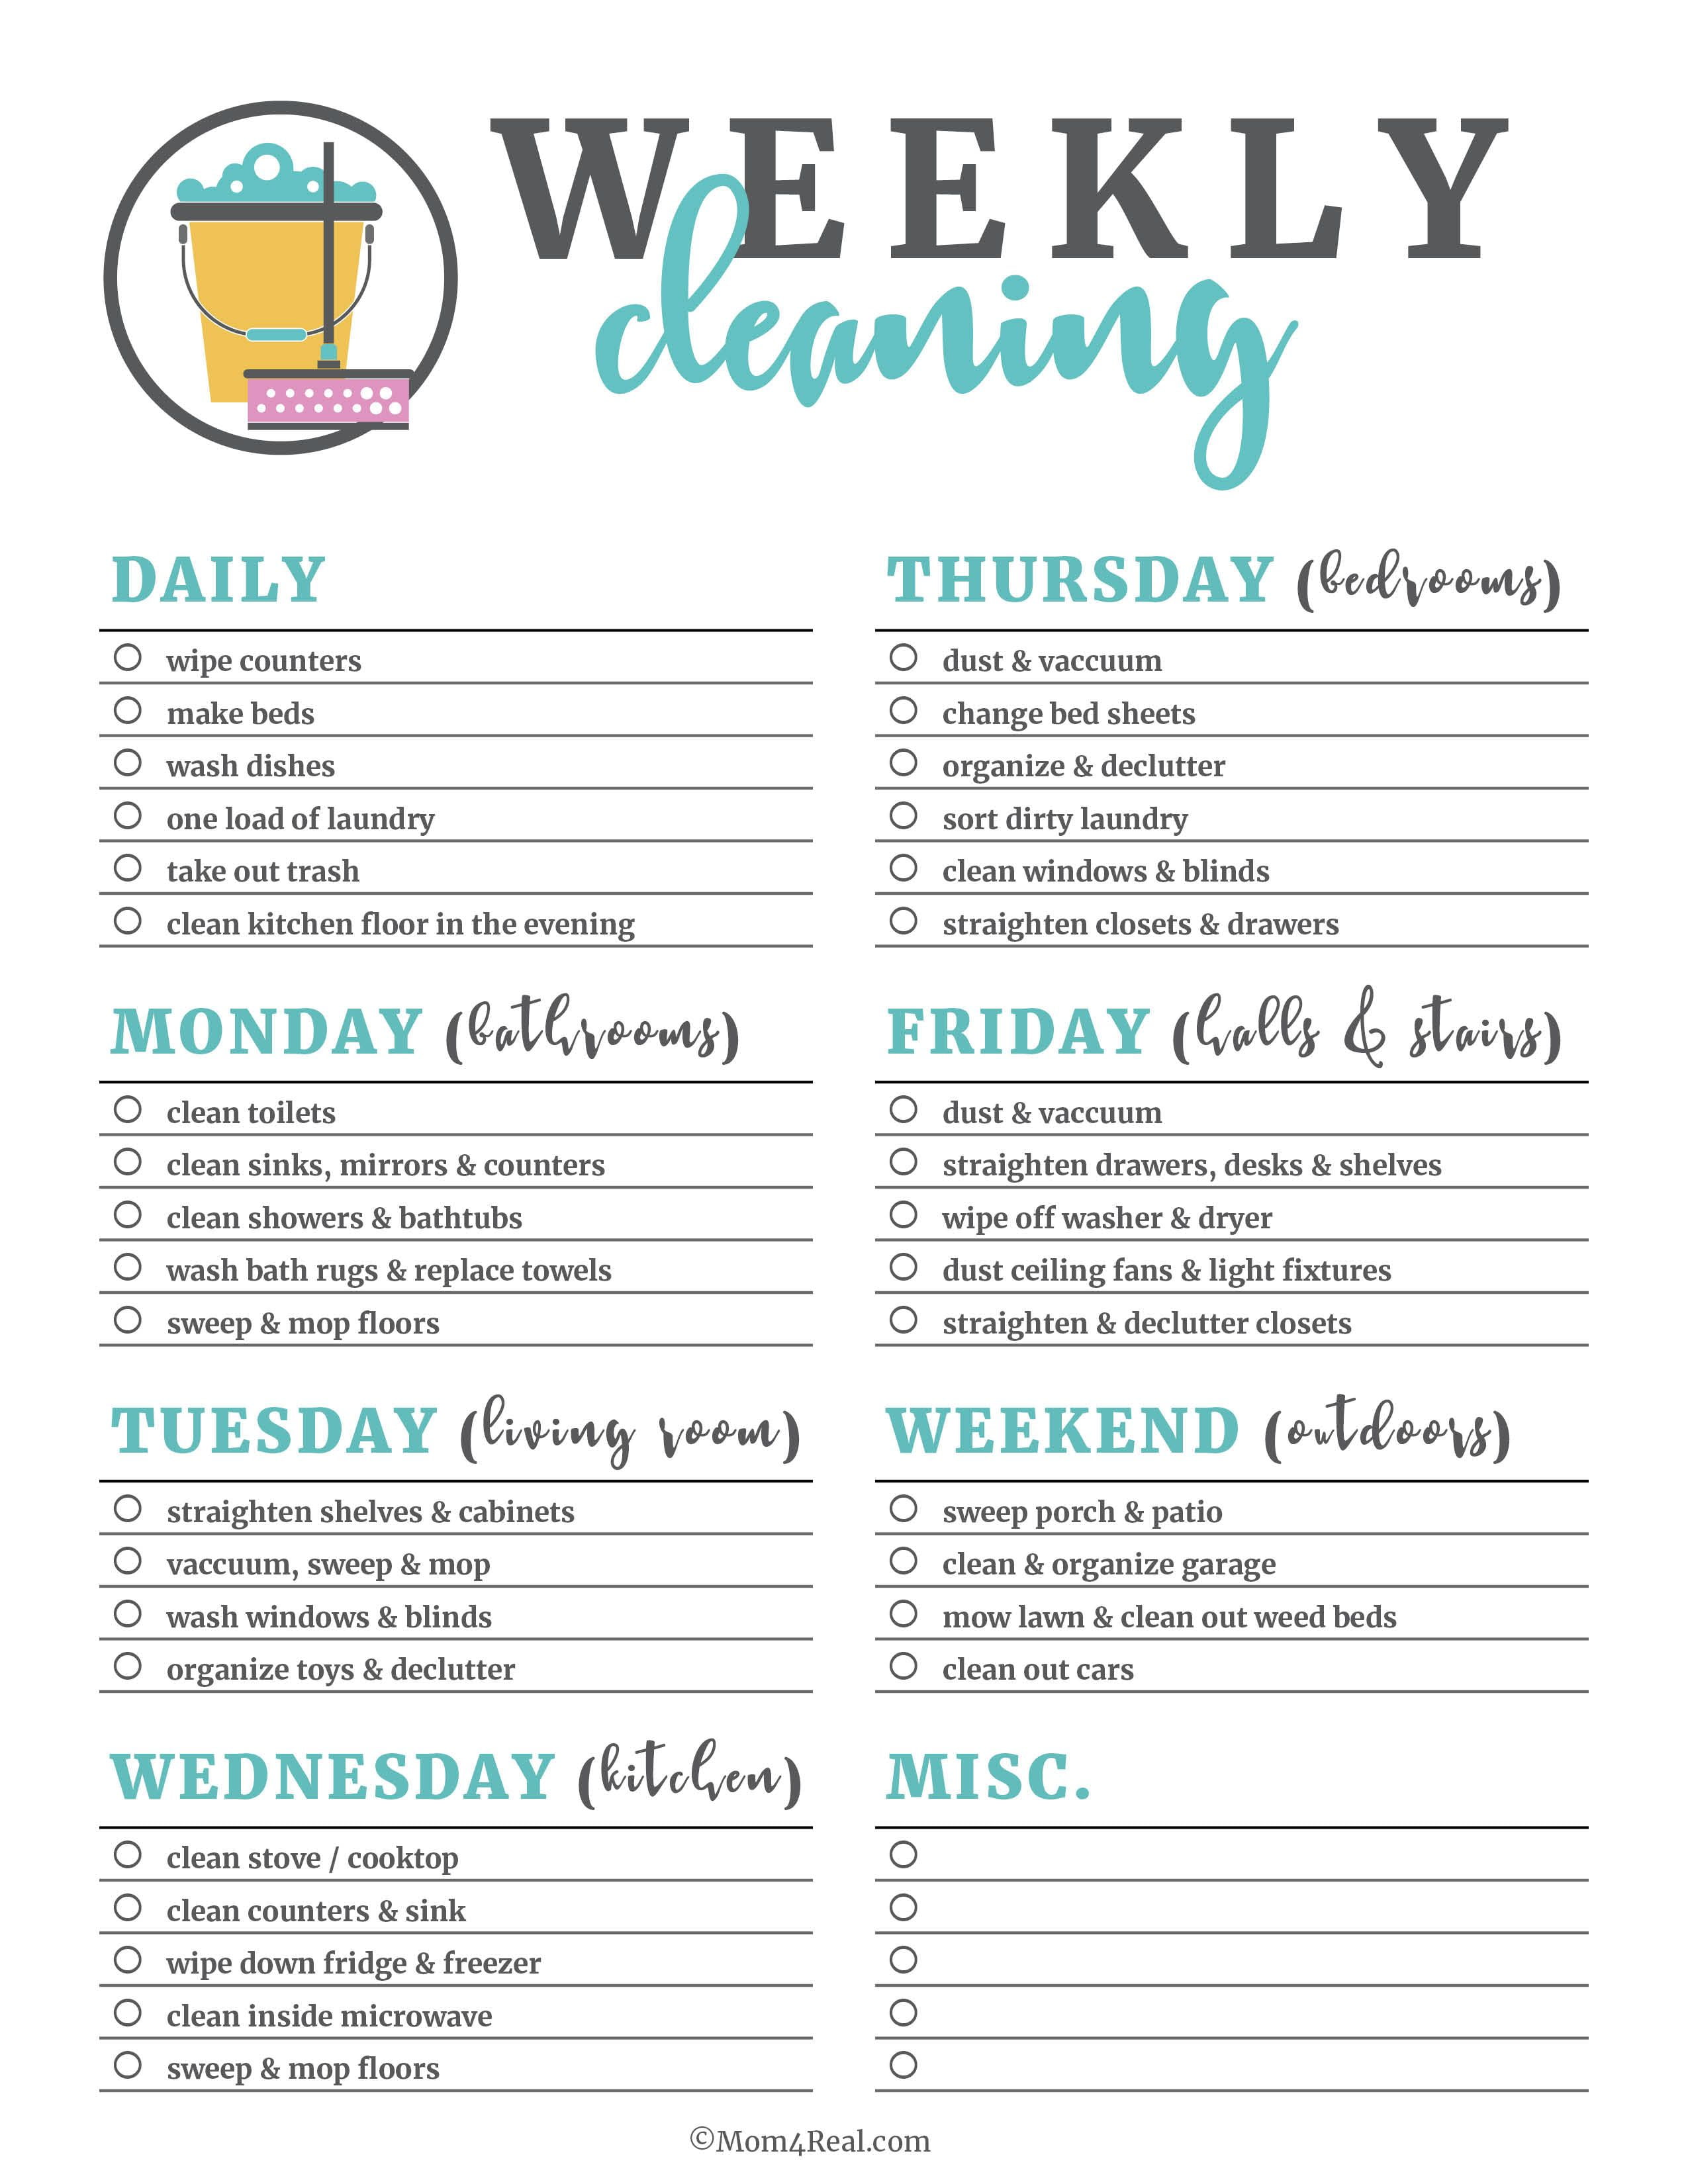 How To Clean Your House In 2 Hours Or Less: Speed Cleaning Checklist